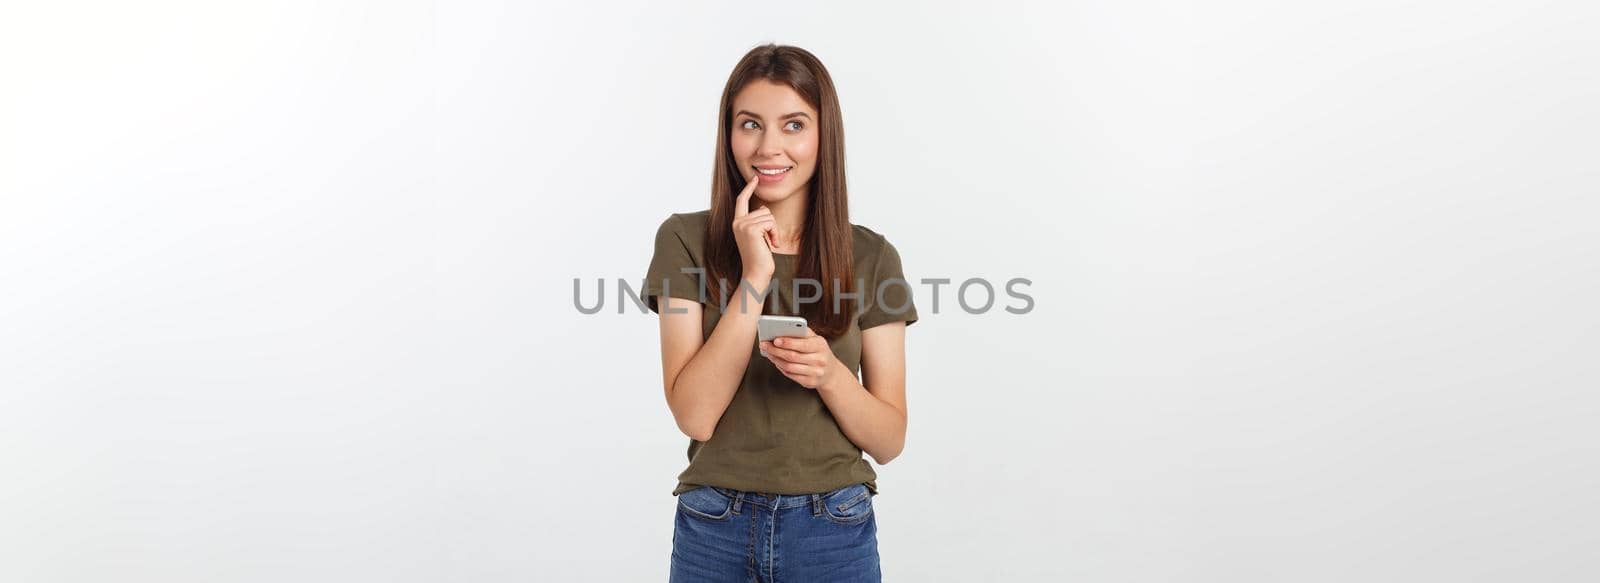 Laughing woman talking and texting on the phone isolated on a white background